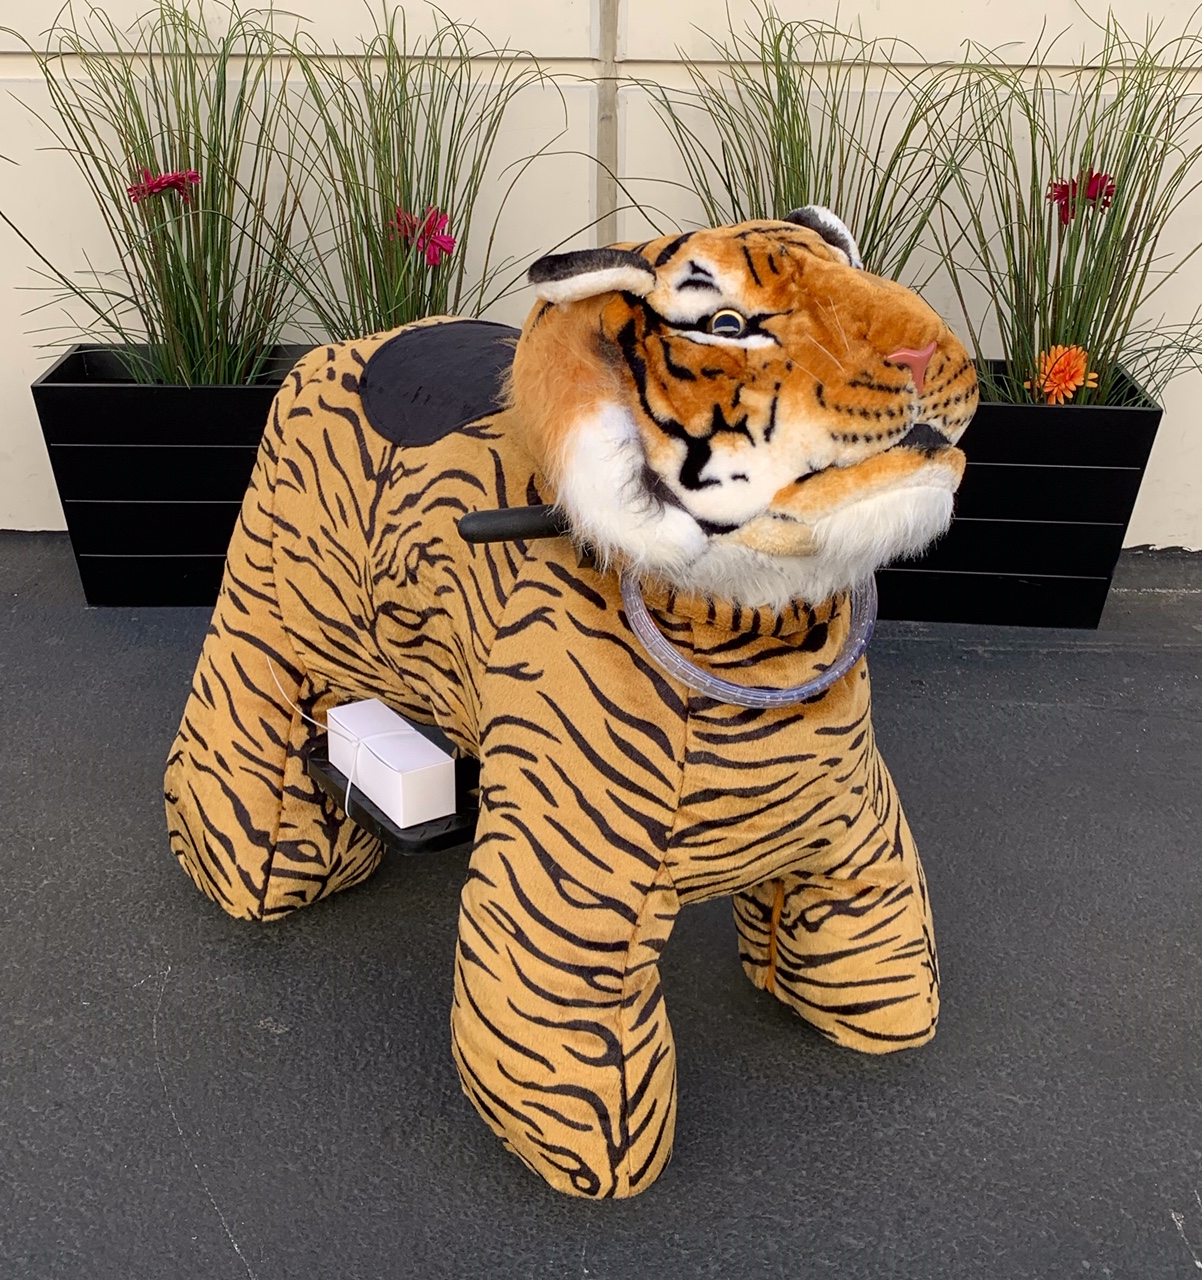 MINI TIGER by Giddy Up Rides BATTERY OPERATED MOTORIZED RIDE ON TOYS FOR KIDS 